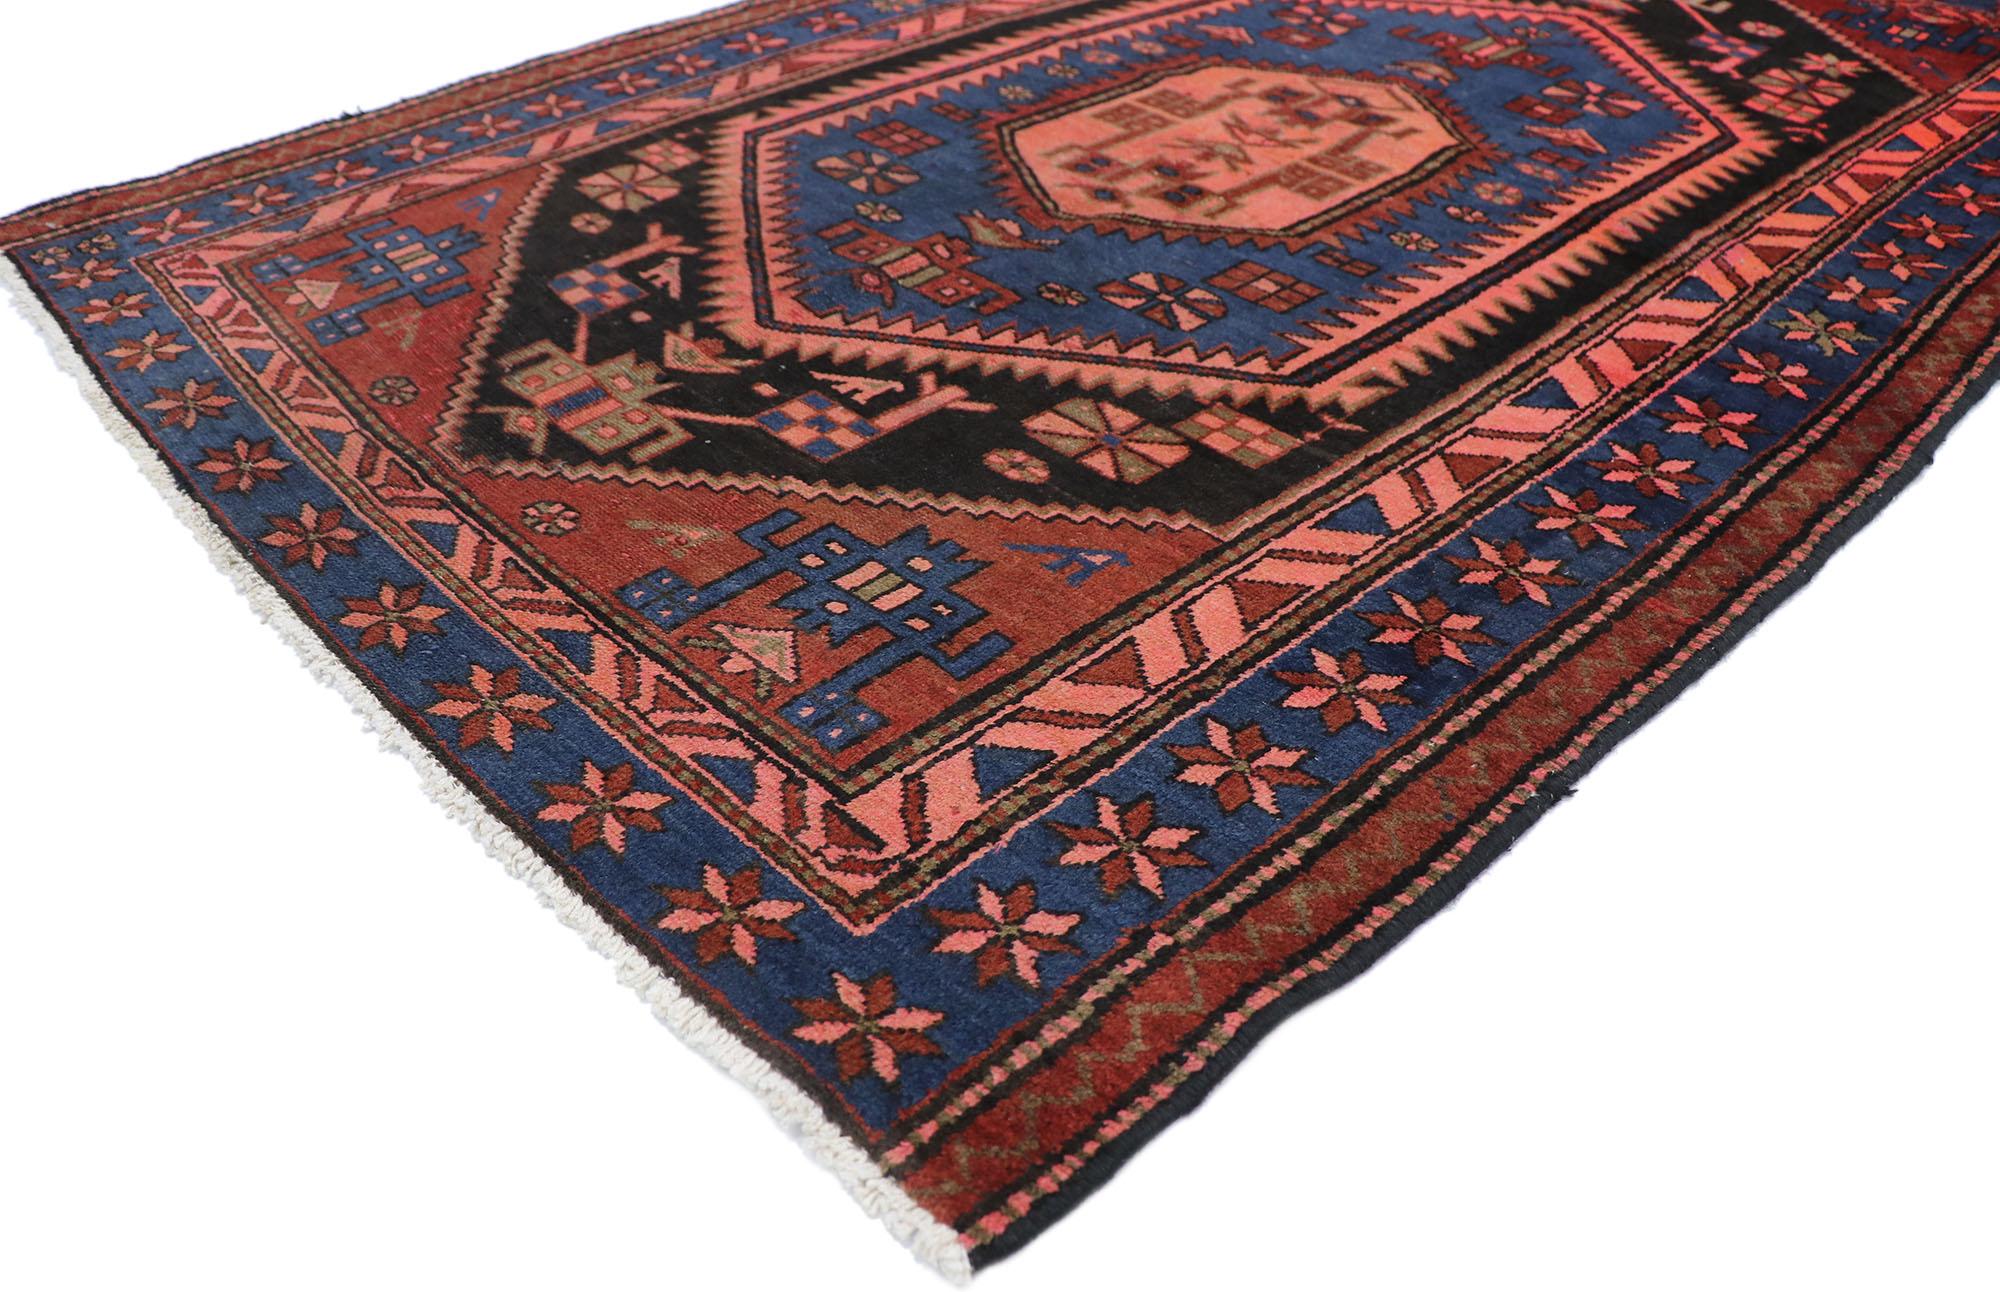 77671 vintage Persian Hamadan rug with Tribal style 04'04 x 06'06. Full of tiny details and a bold expressive design combined with vibrant colors and tribal style, this hand-knotted wool vintage Persian Hamadan rug is a captivating vision of woven